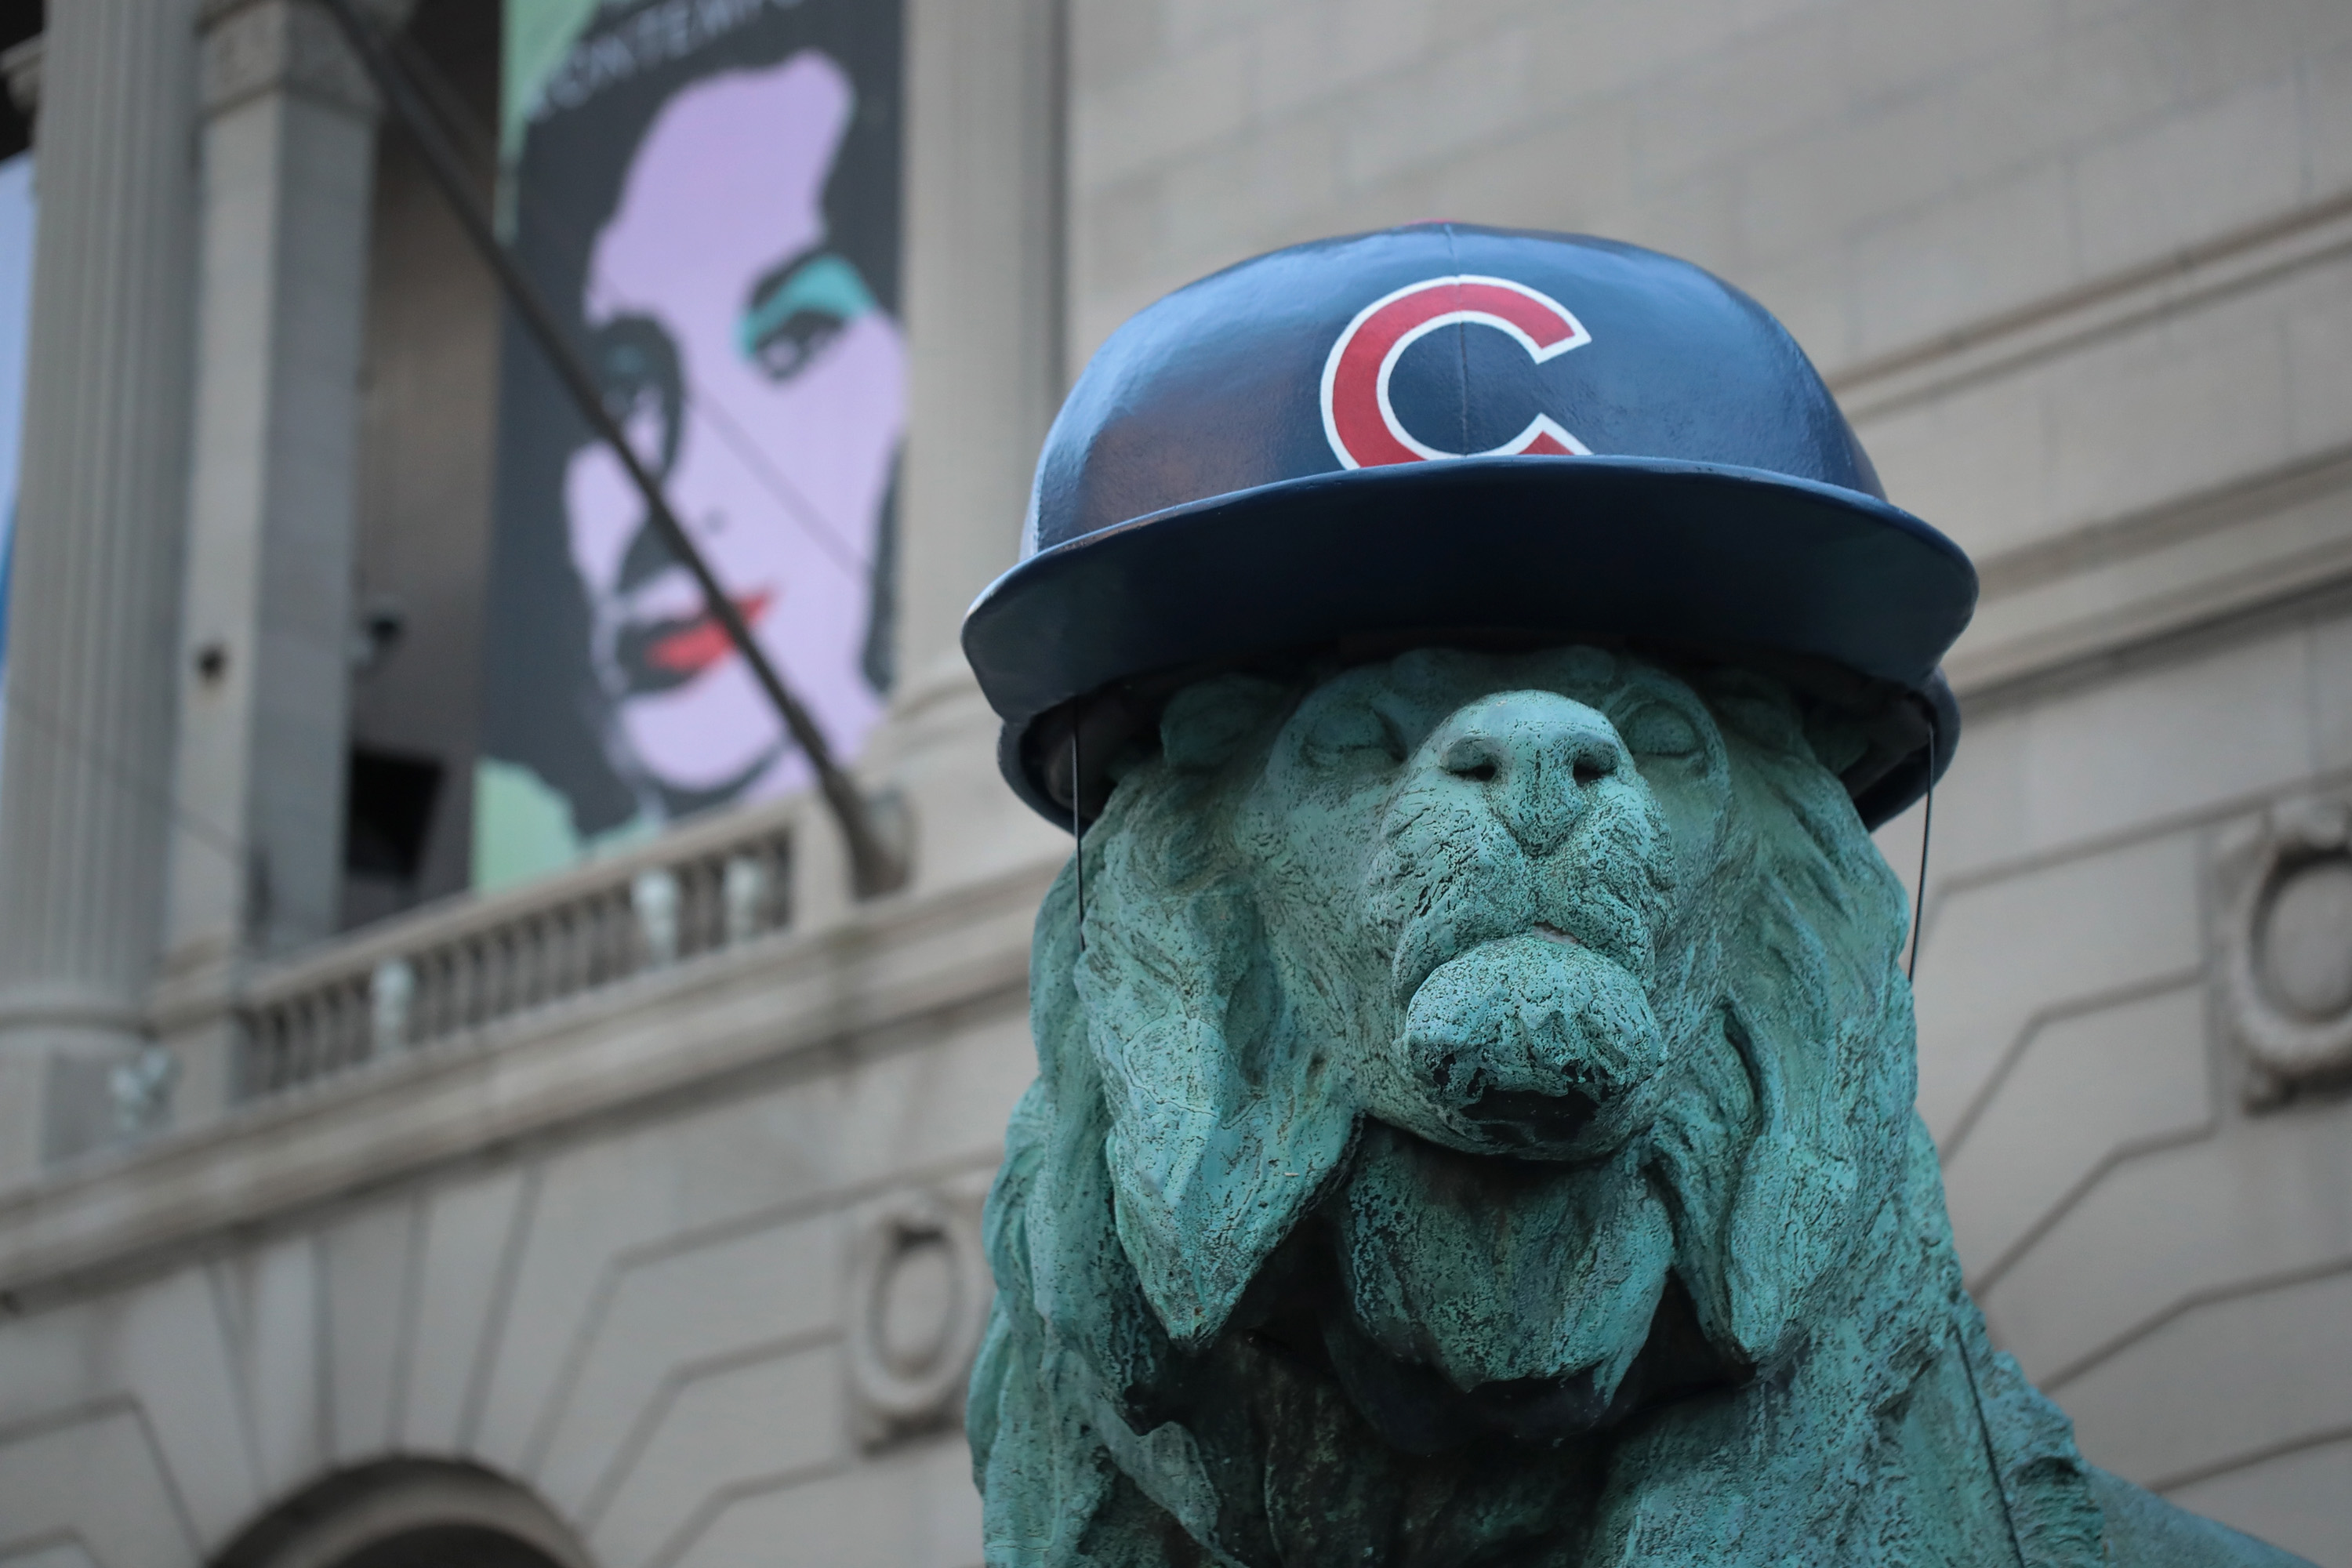 CHICAGO, IL - OCTOBER 24: A lion sculpture outside the Art Institute of Chicago wears a batting helmet to help the city celebrate the Chicago Cubs making it into the World Series on October 24, 2016 in Chicago, Illinois. The Cubs will face off against the Cleveland Indians in the World Series beginning tomorrow. This will be the Cubs first trip to the Series since 1945. The Indians last trip to the Series was 1948.